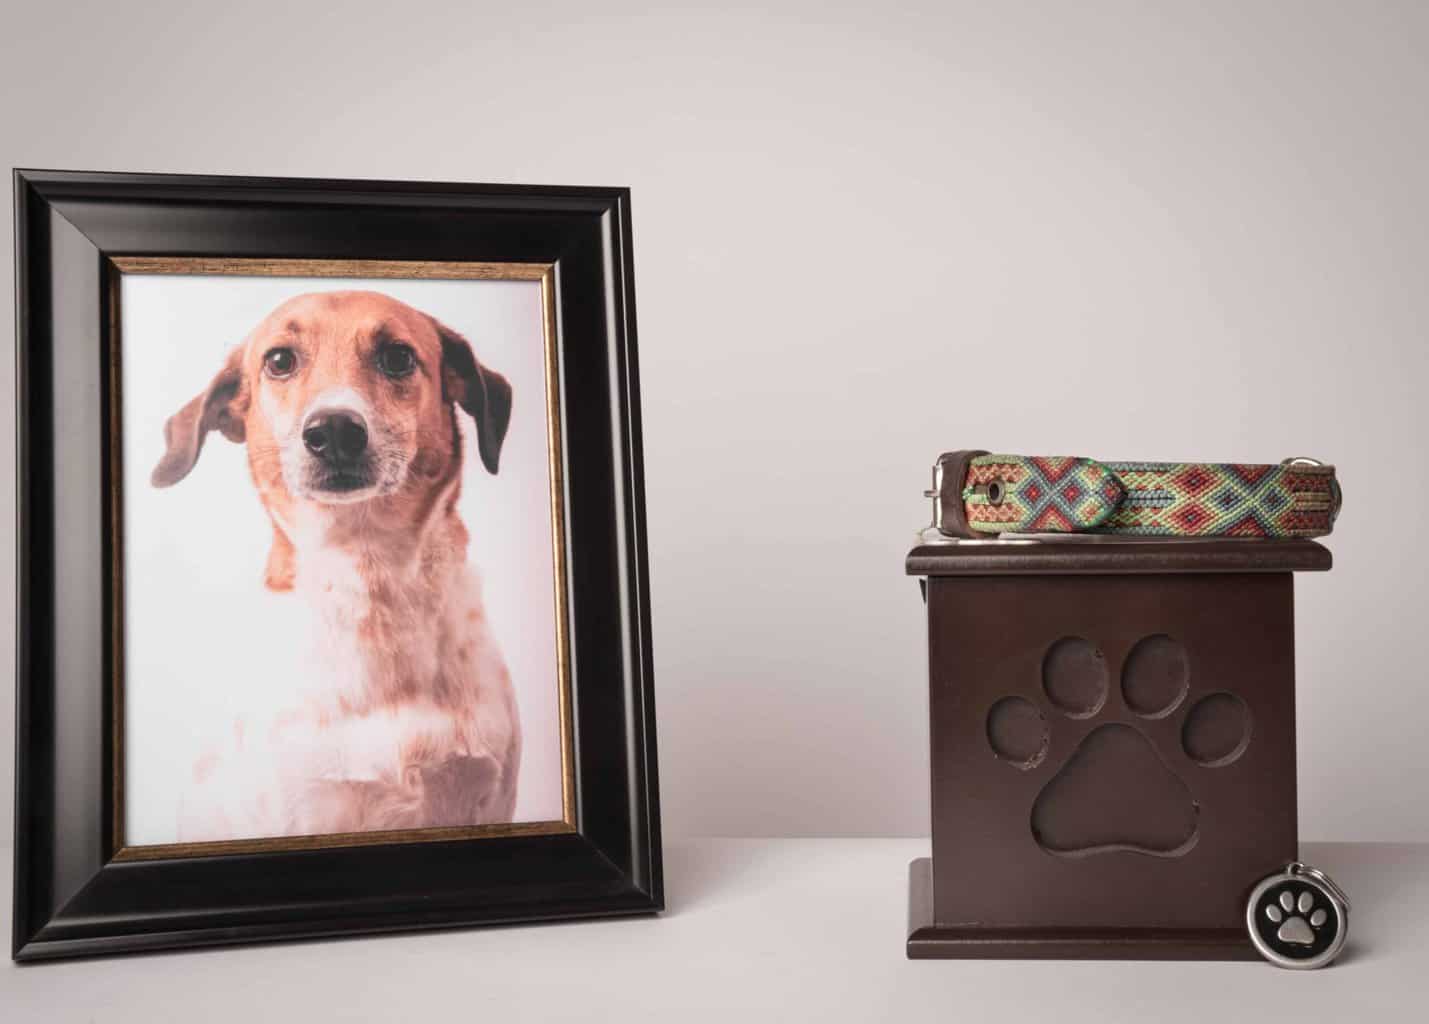 Illustration showing dog portrait, memory box, collar and tag. To help you grieve, use the memorial ideas in this article to remember your dog and celebrate the life of your beloved pet.